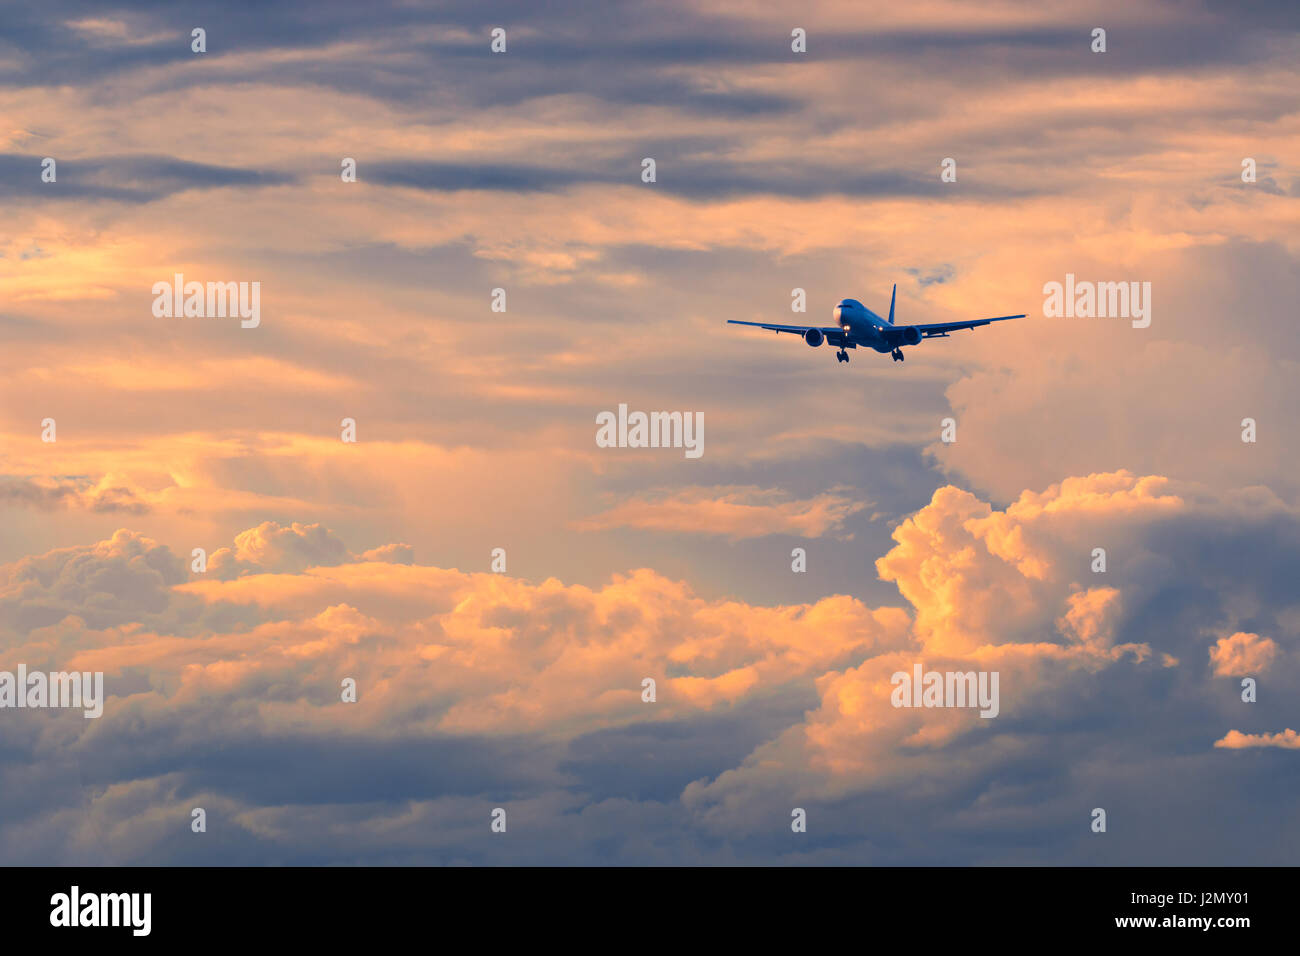 Commercial passenger airplane coming in for landing against beautiful colorful sunset, color and contrast enhanced Stock Photo